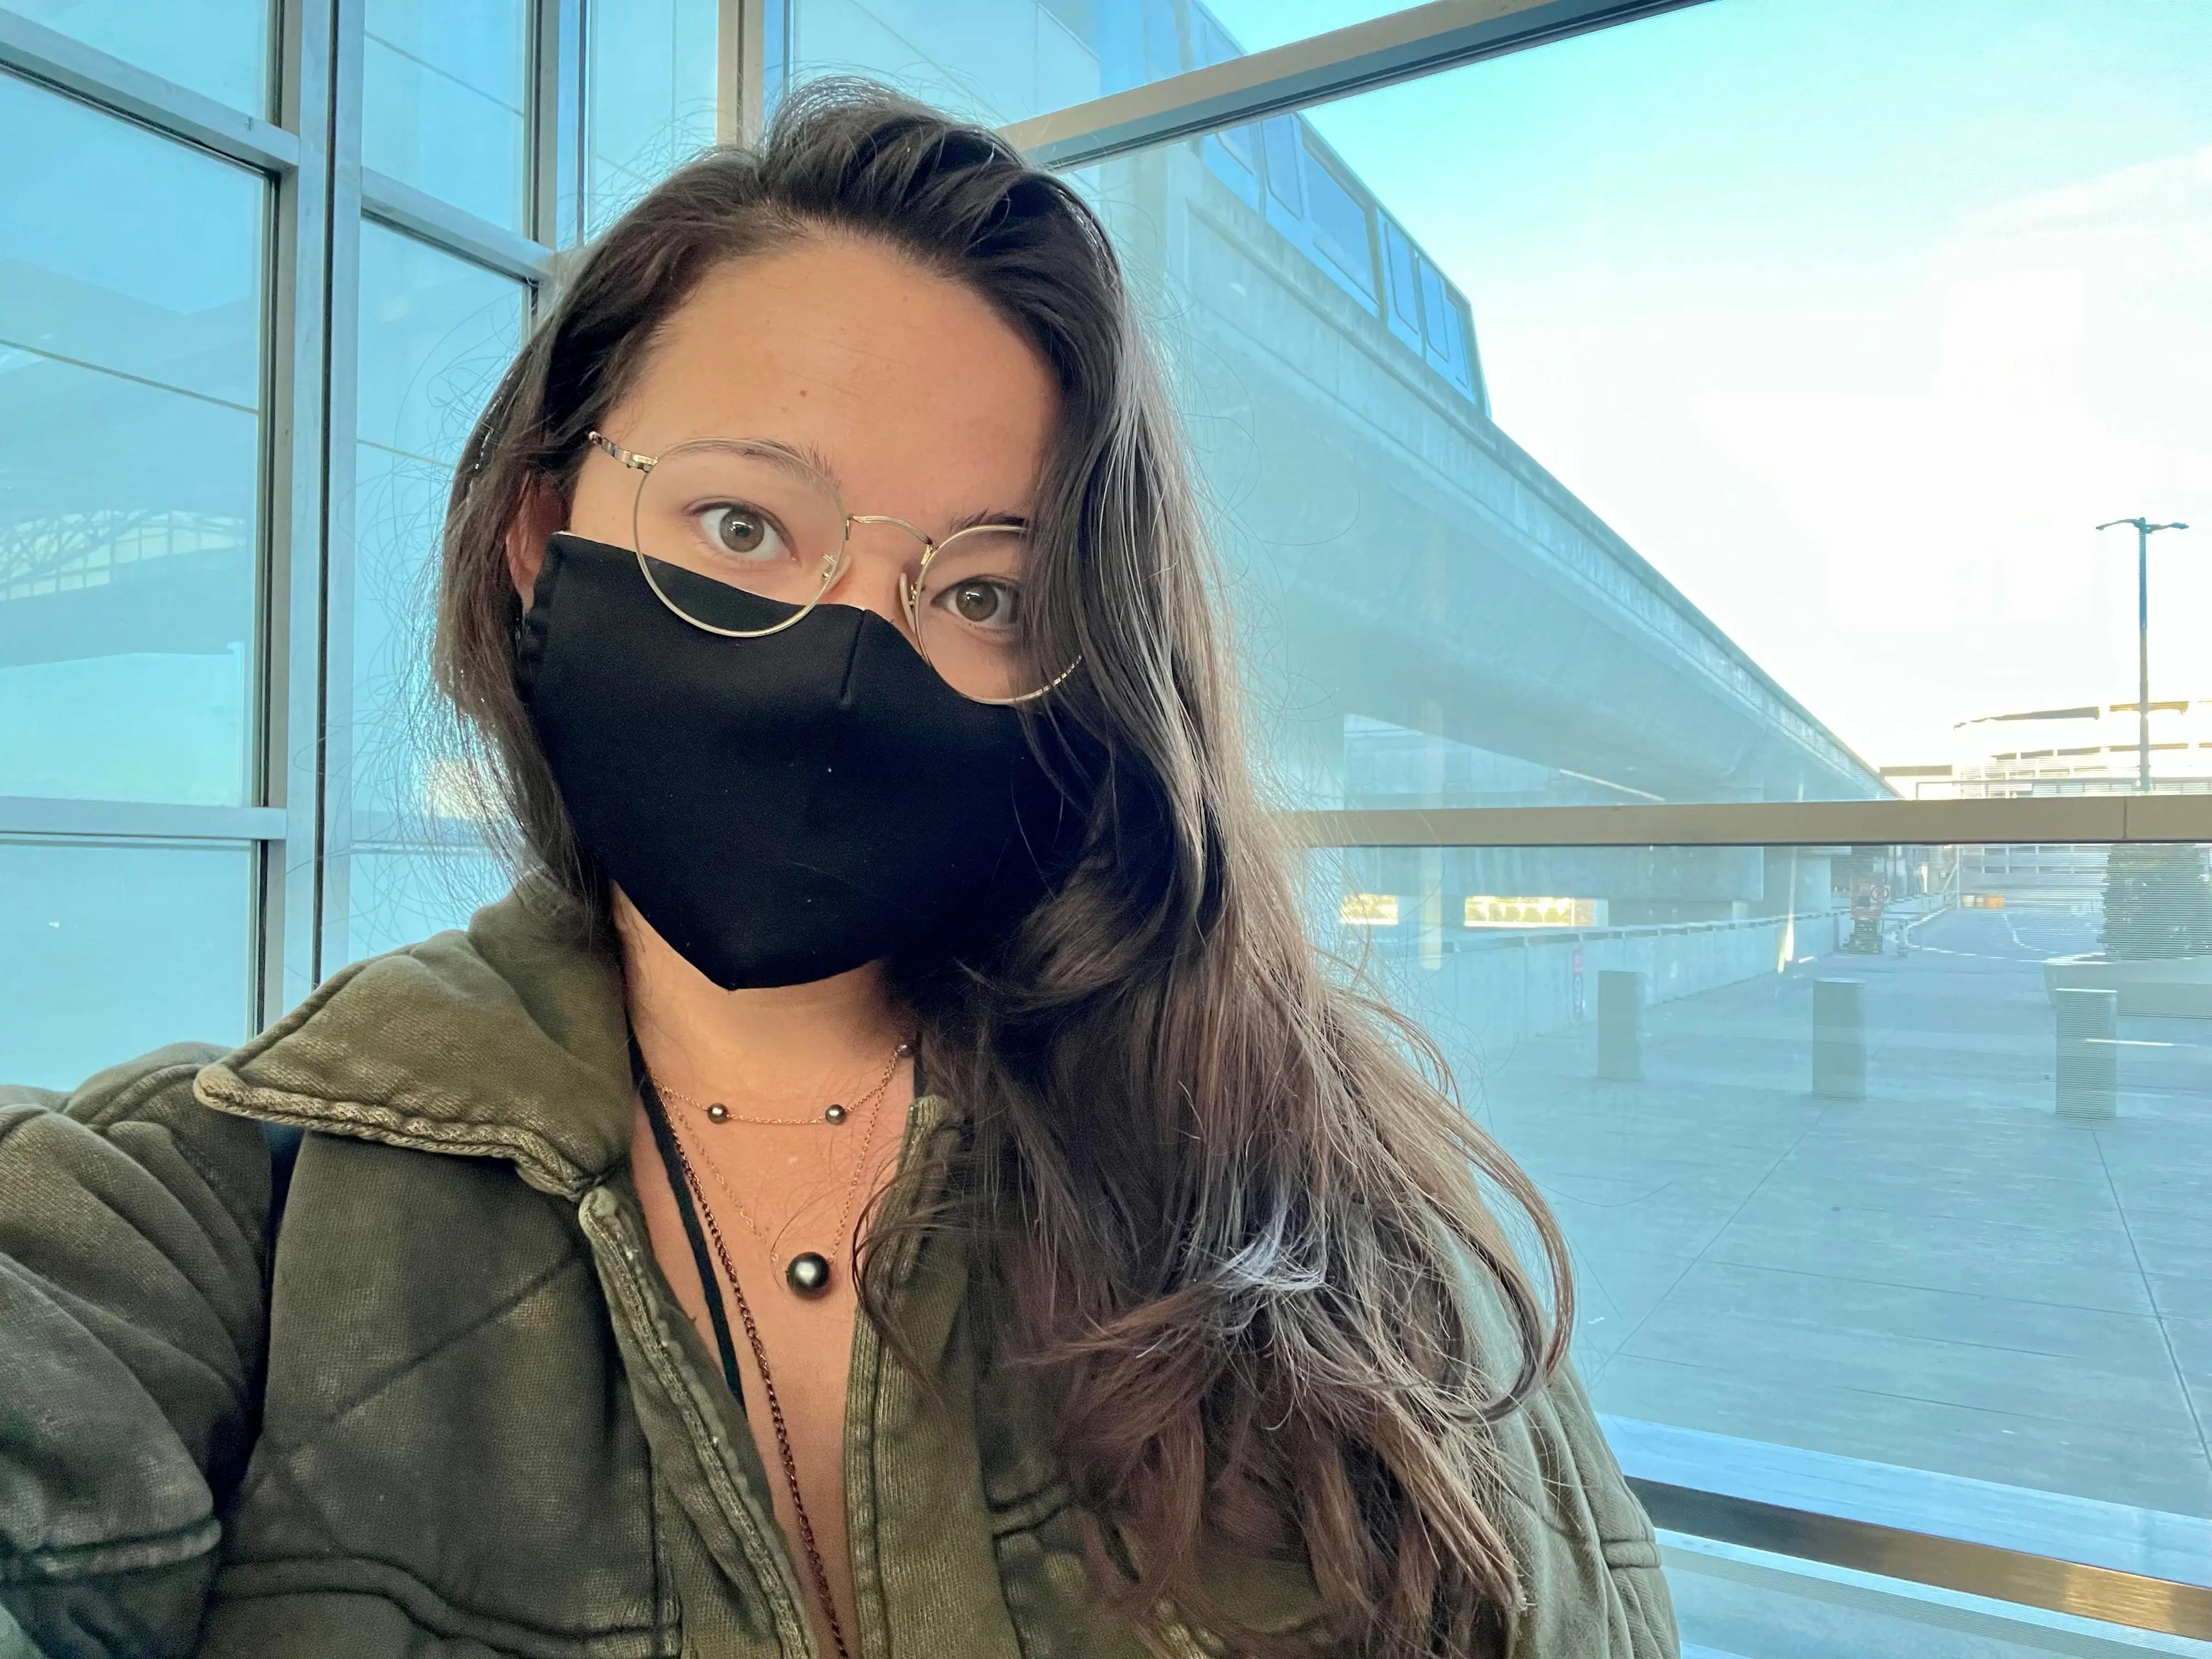 ashely posing for a selfie at the airport in san francisco